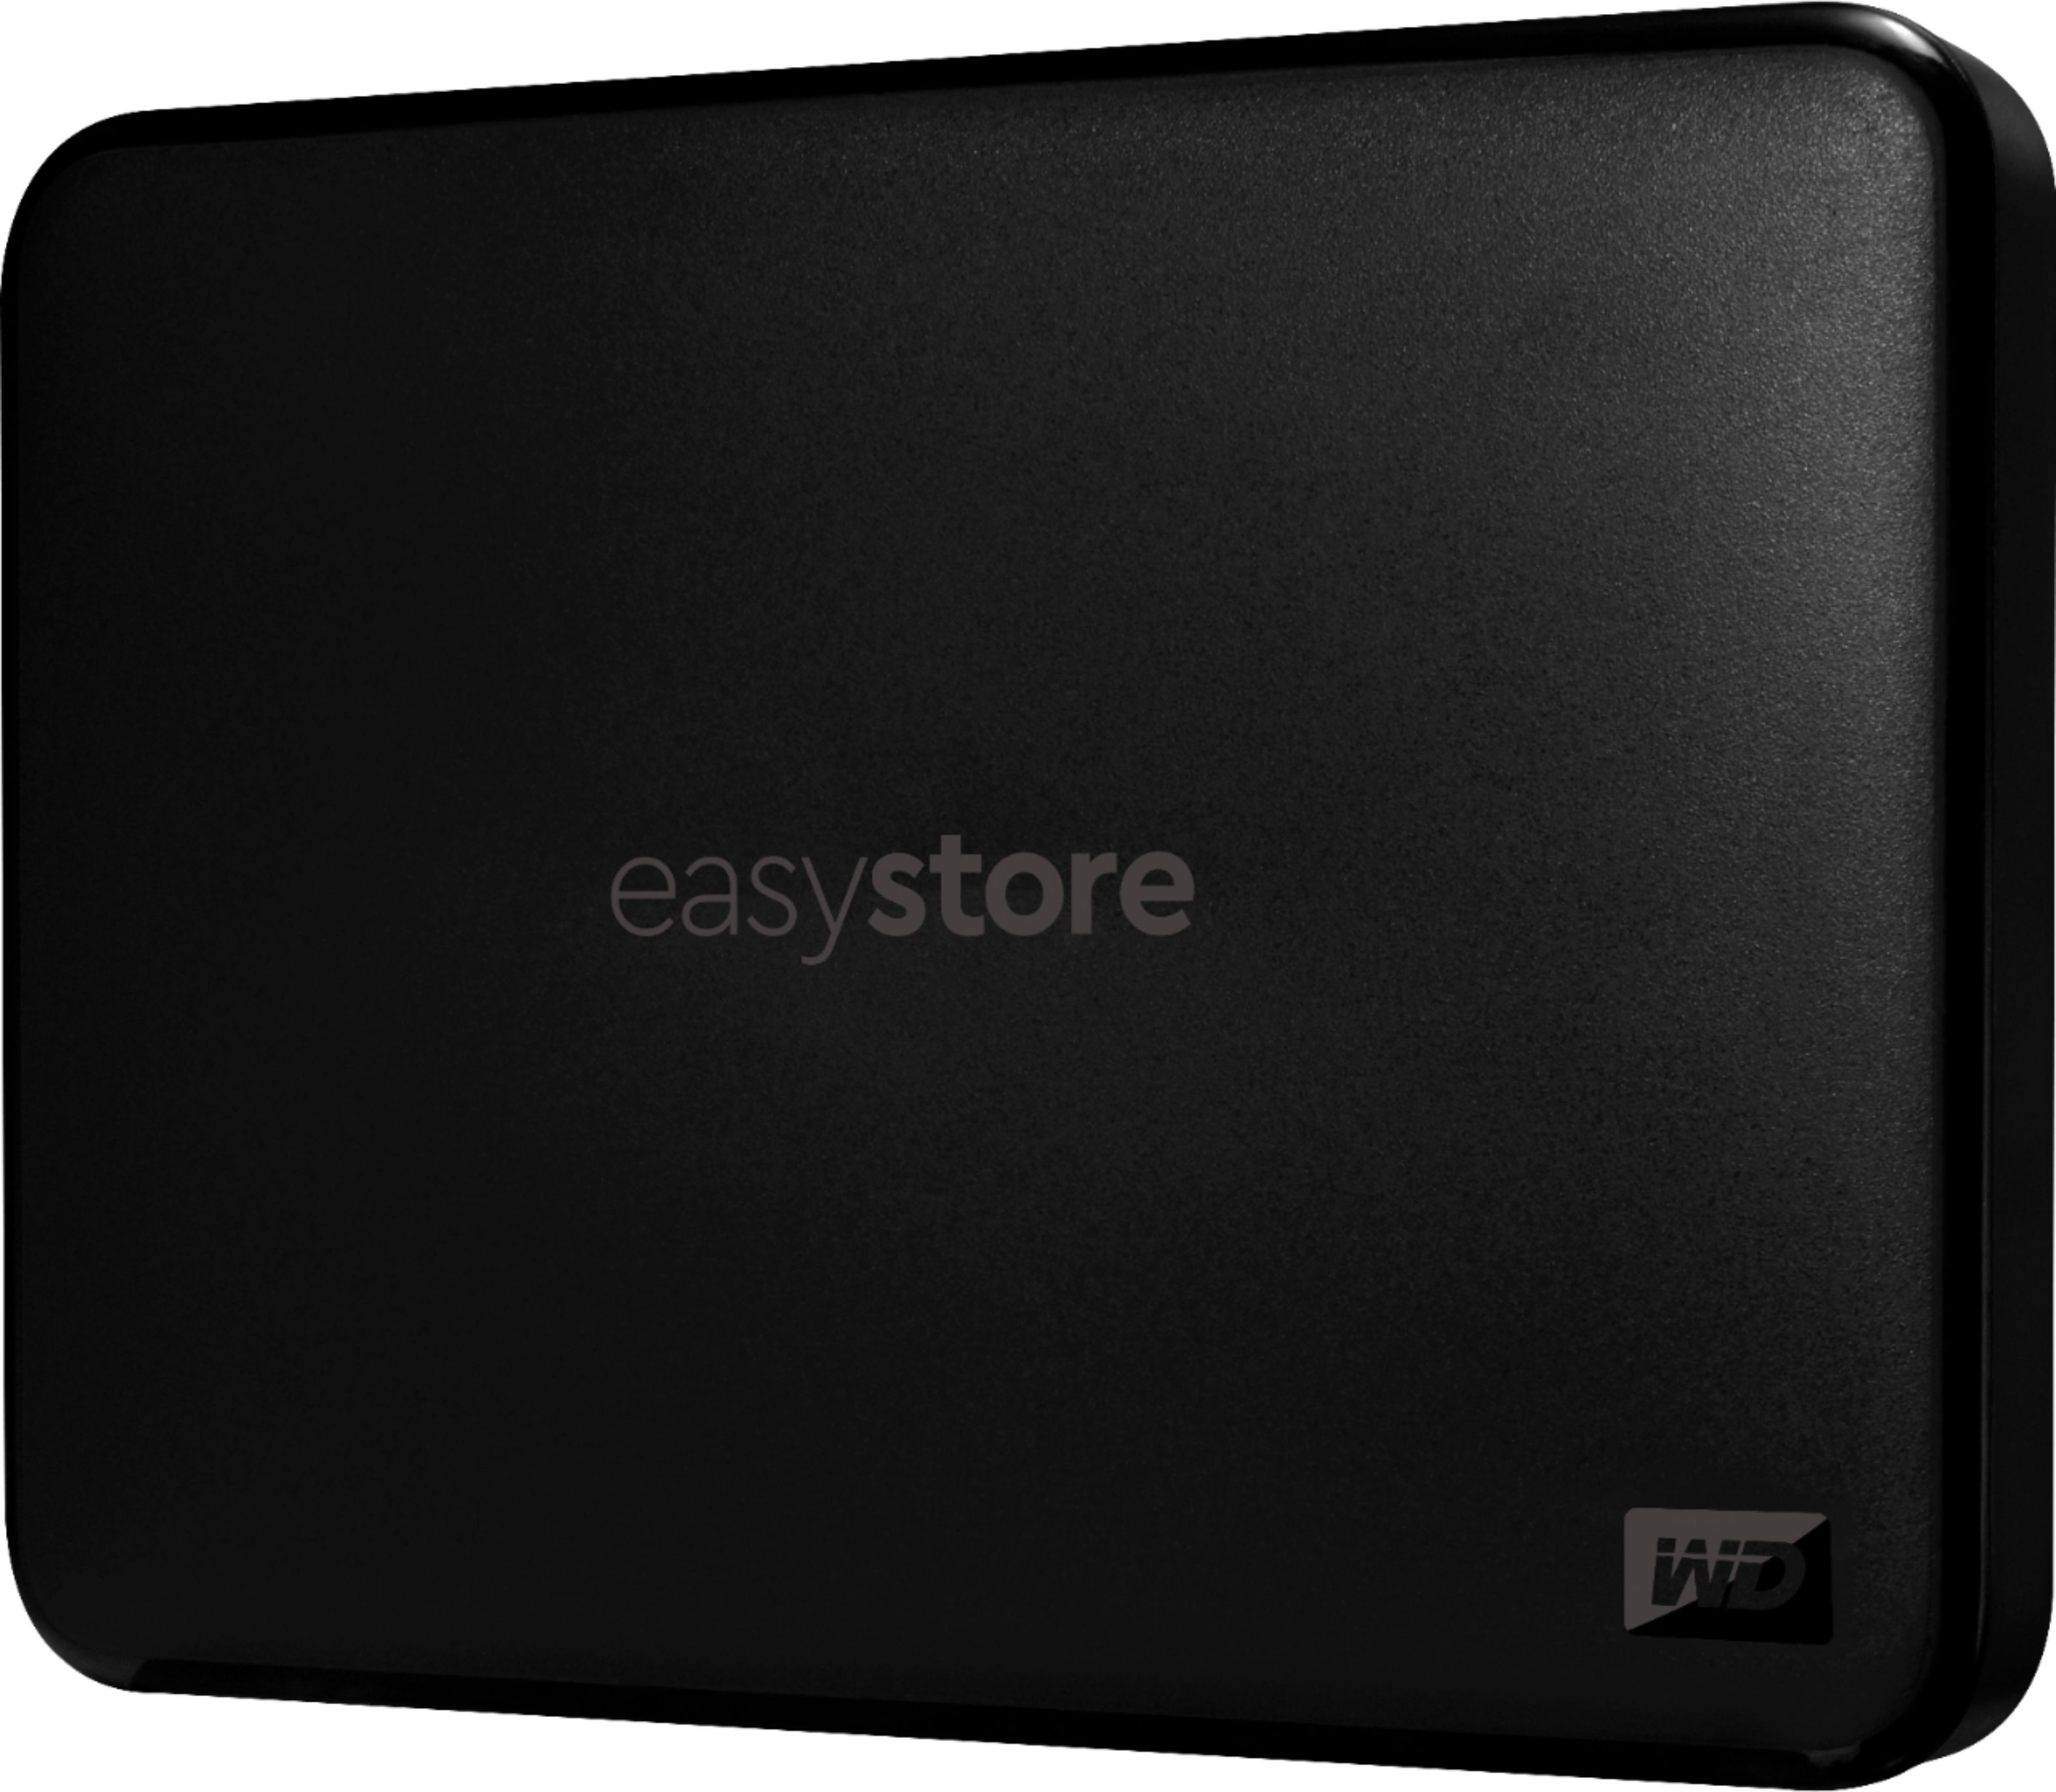 Zoom in on Front Zoom. WD - Easystore 2TB External USB 3.0 Portable Hard Drive - Black.